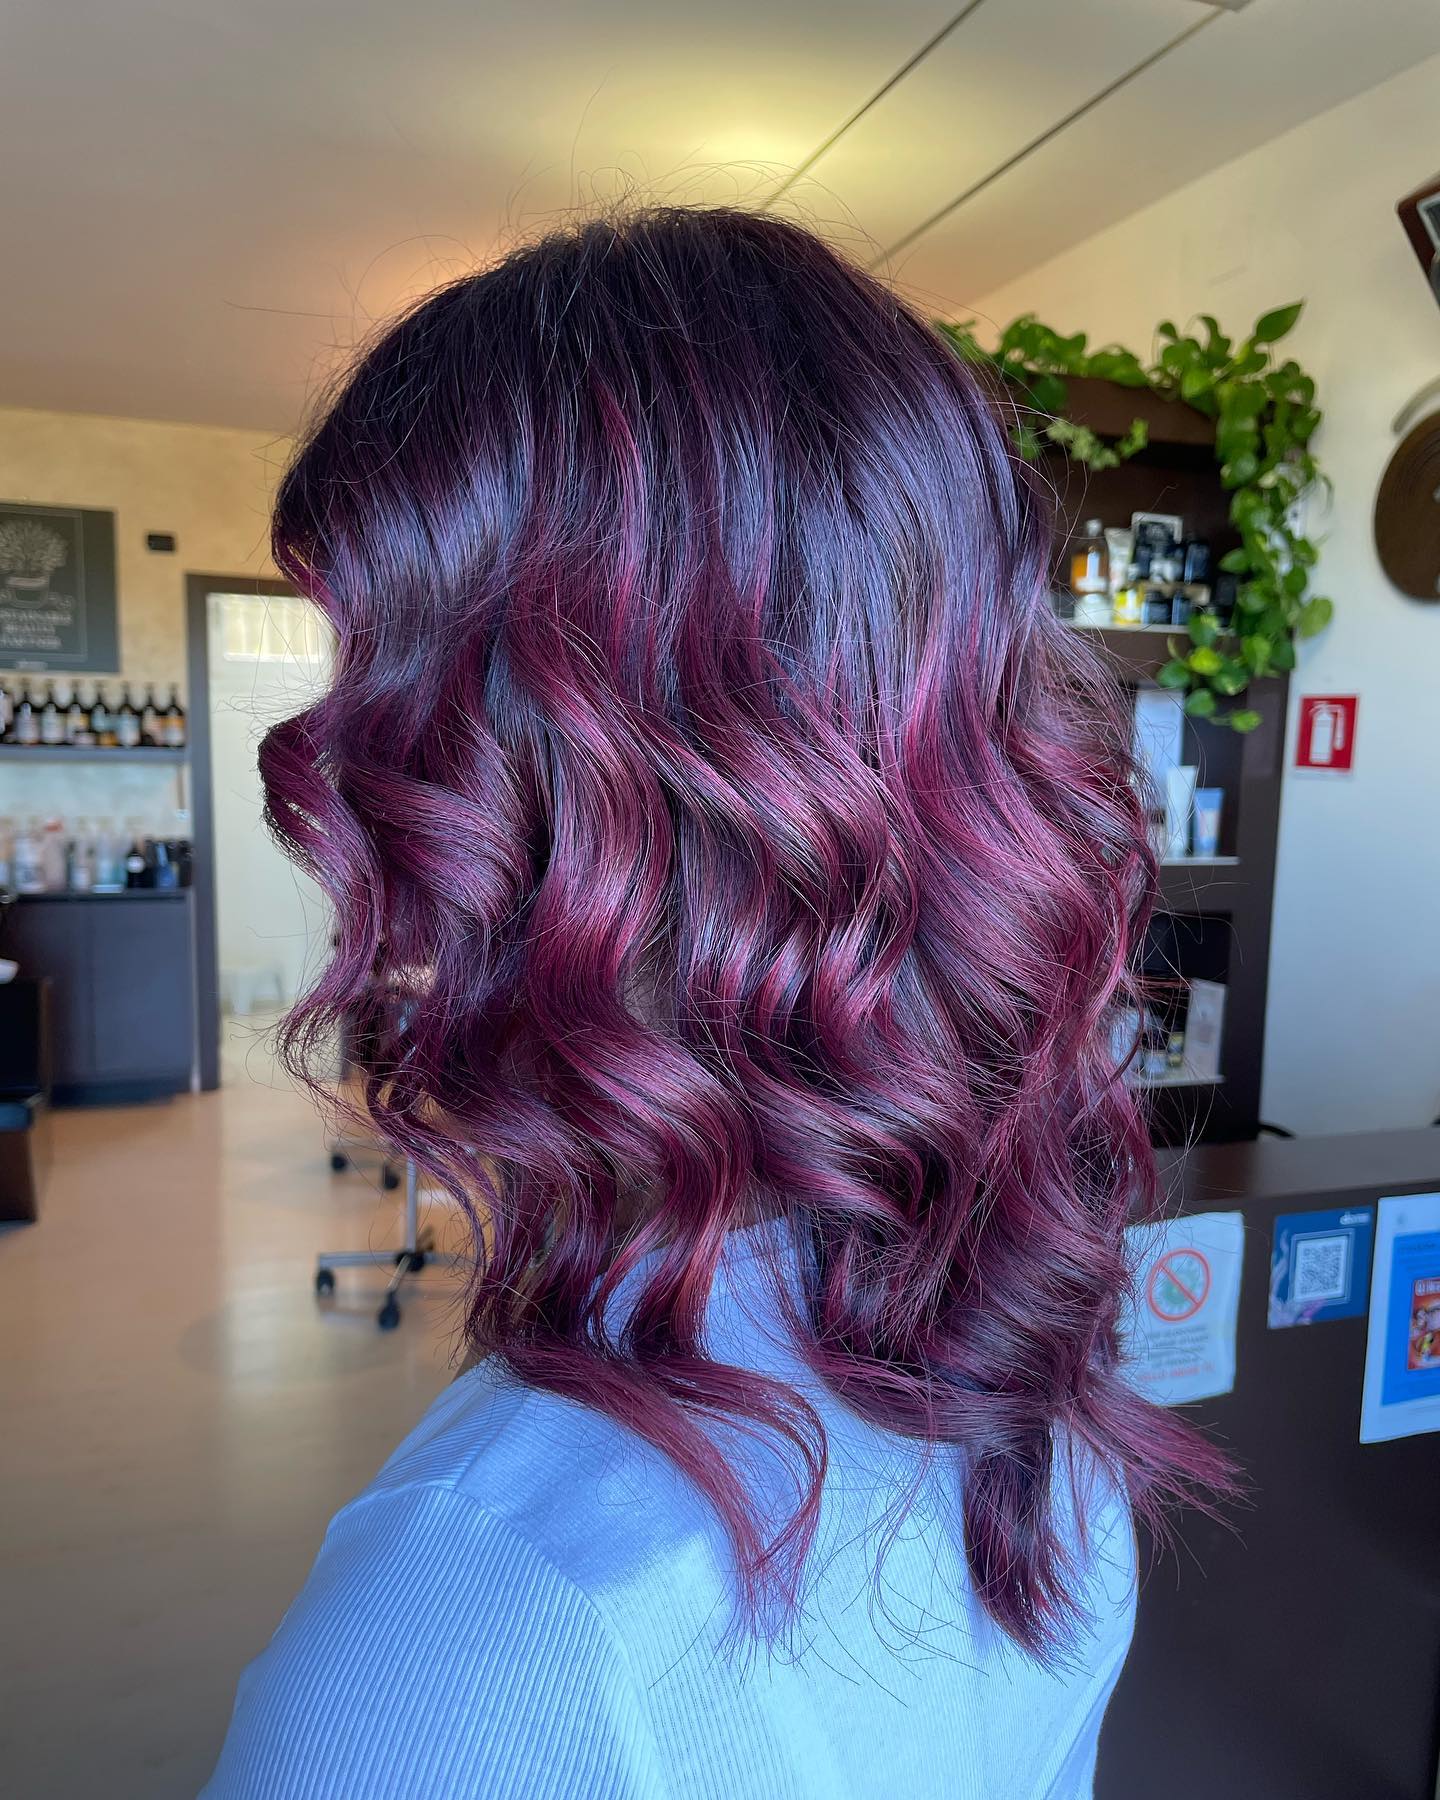 Plum and Cherry Hair Ombre